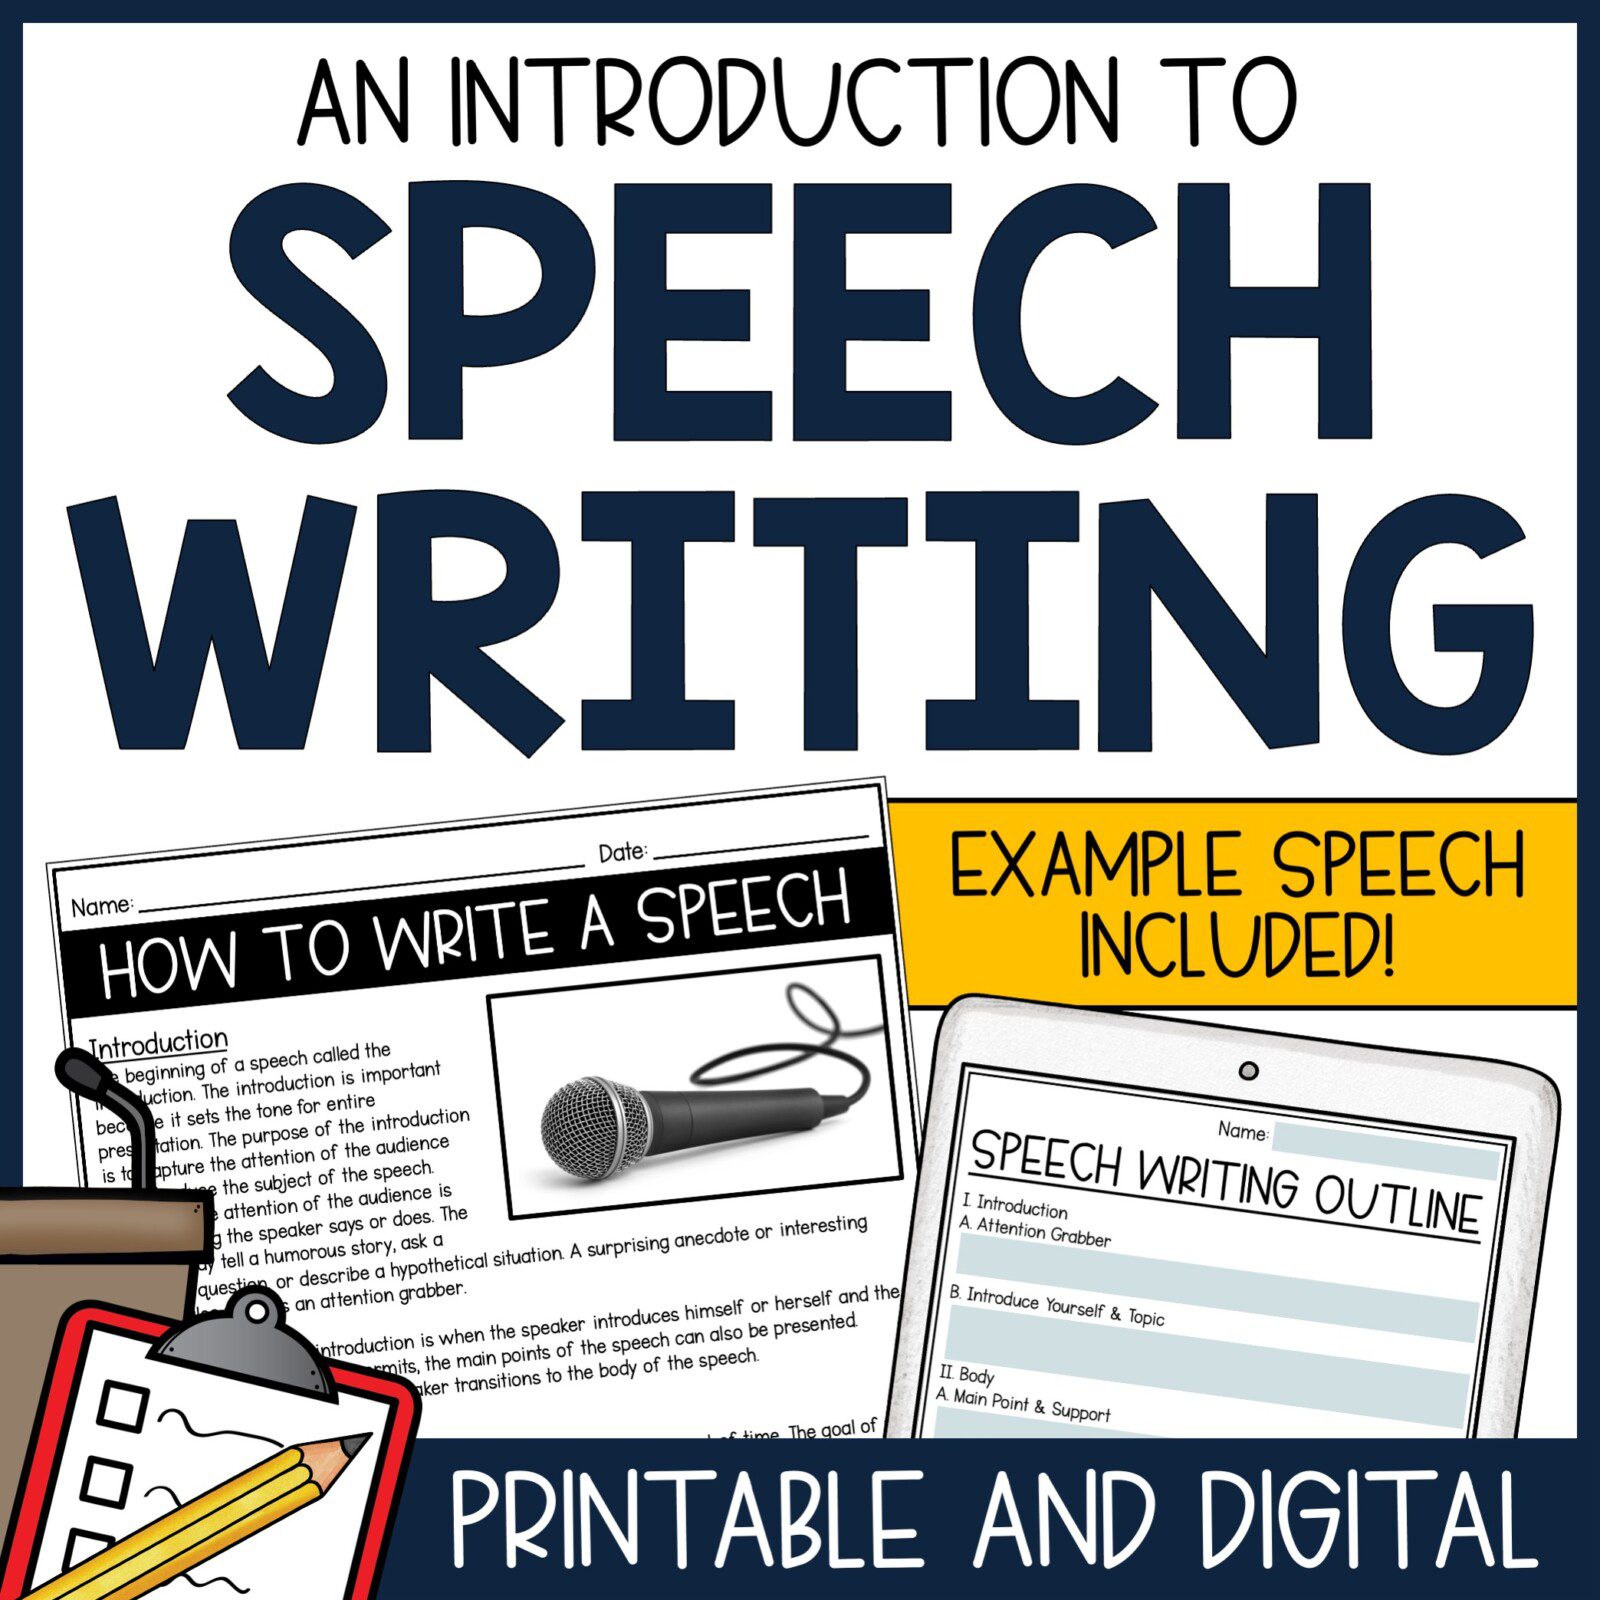 importance of speech writing outline